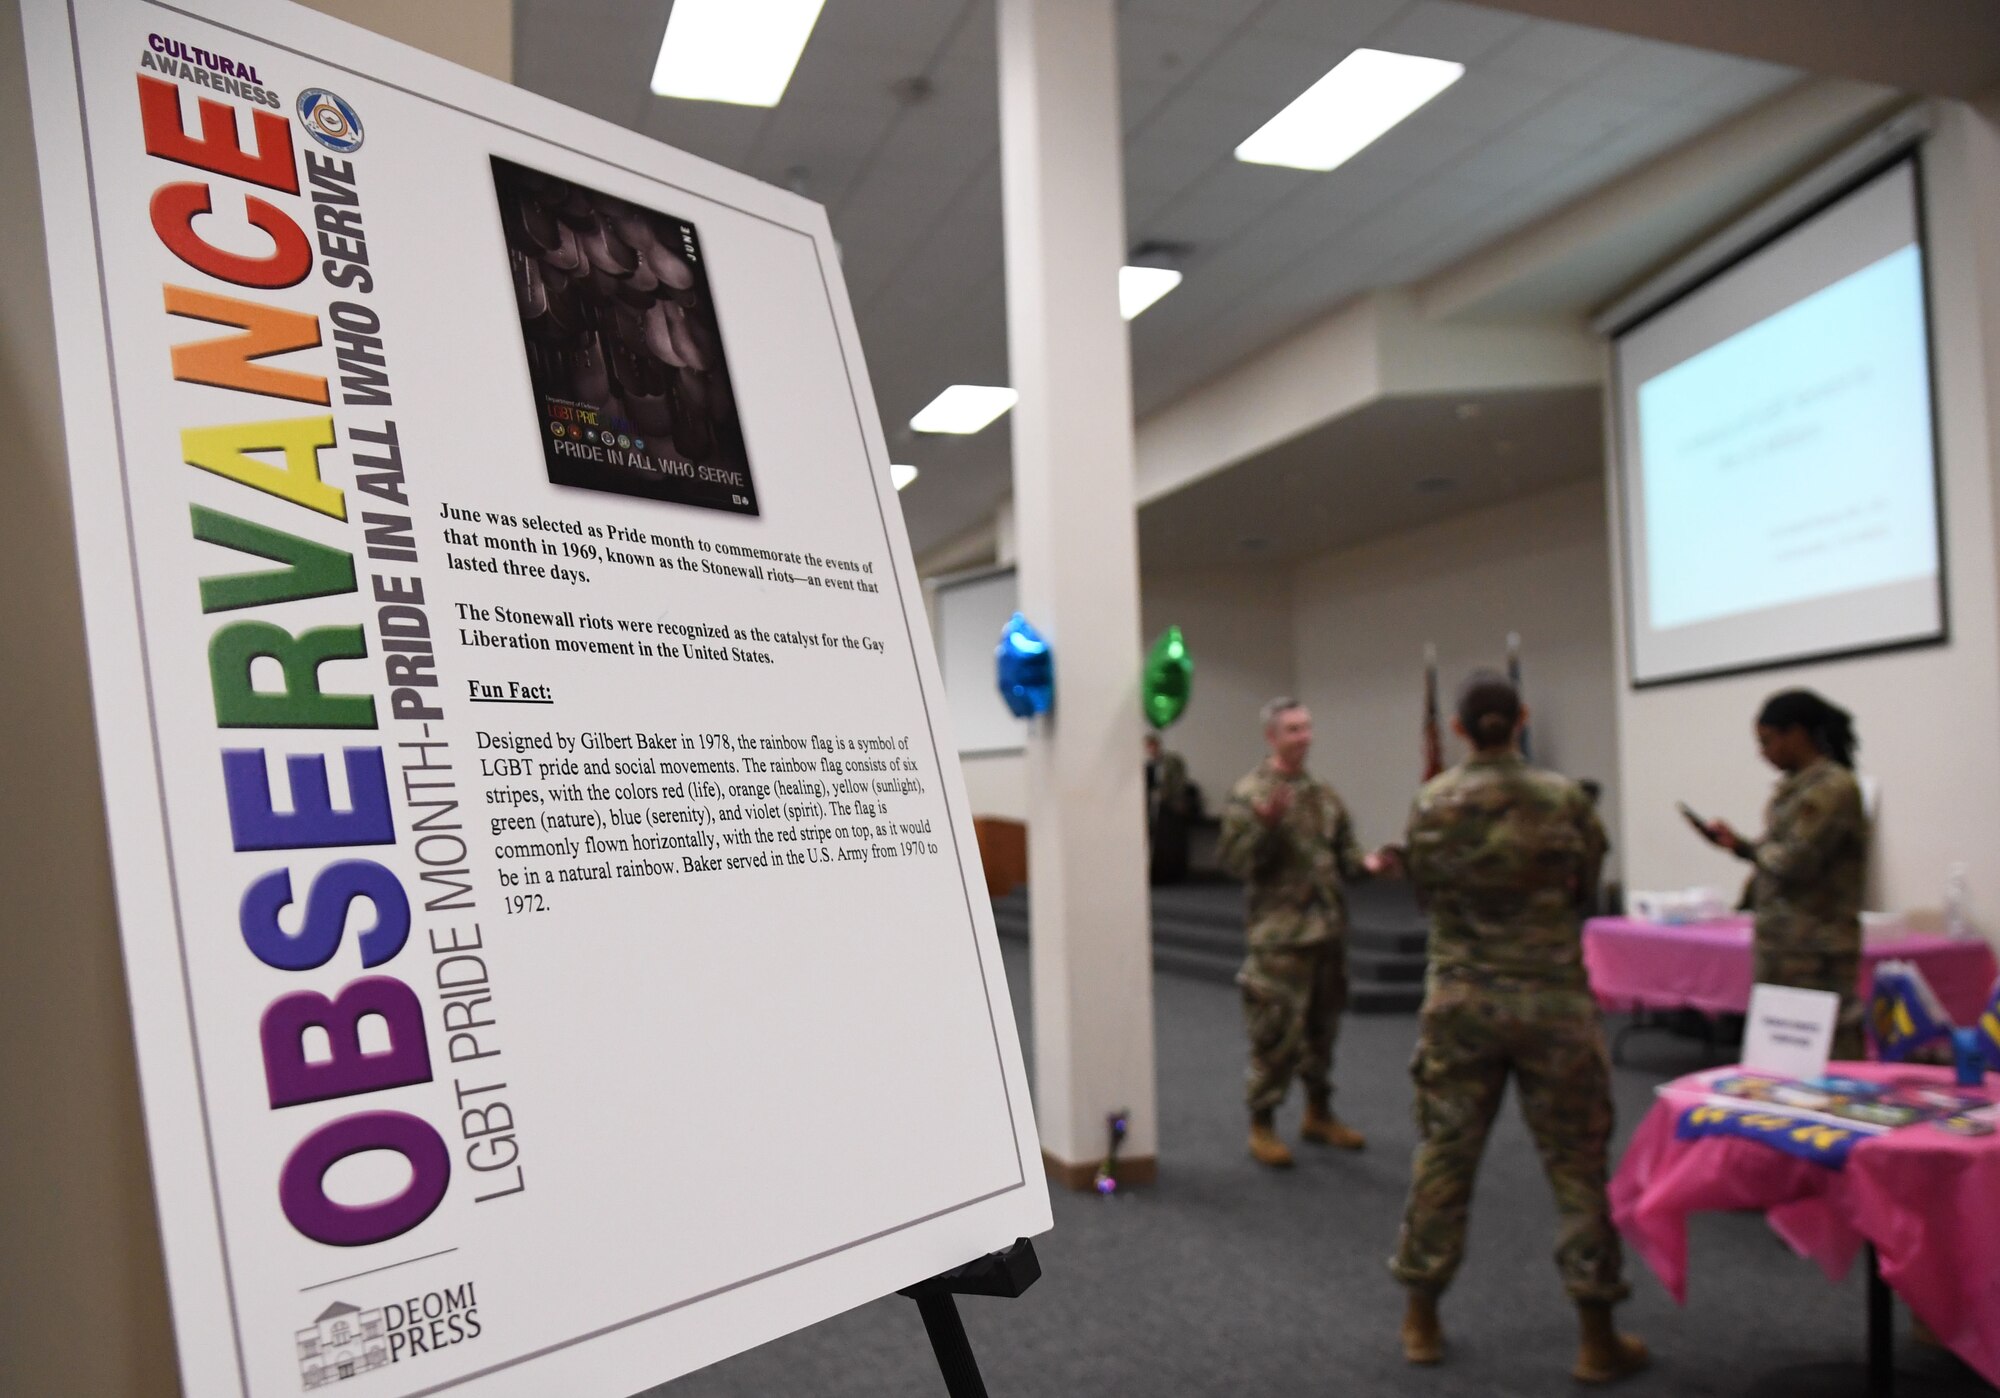 A poster is on display during the LGBTQ+ Informational Expo inside the Roberts Consolidated Aircraft Maintenance Facility at Keesler Air Force Base, Mississippi, June 25, 2021. Keesler celebrated Pride Month throughout June, with events such as a scavenger hunt, guest speaker and discussion panel. (U.S. Air Force photo by Kemberly Groue)